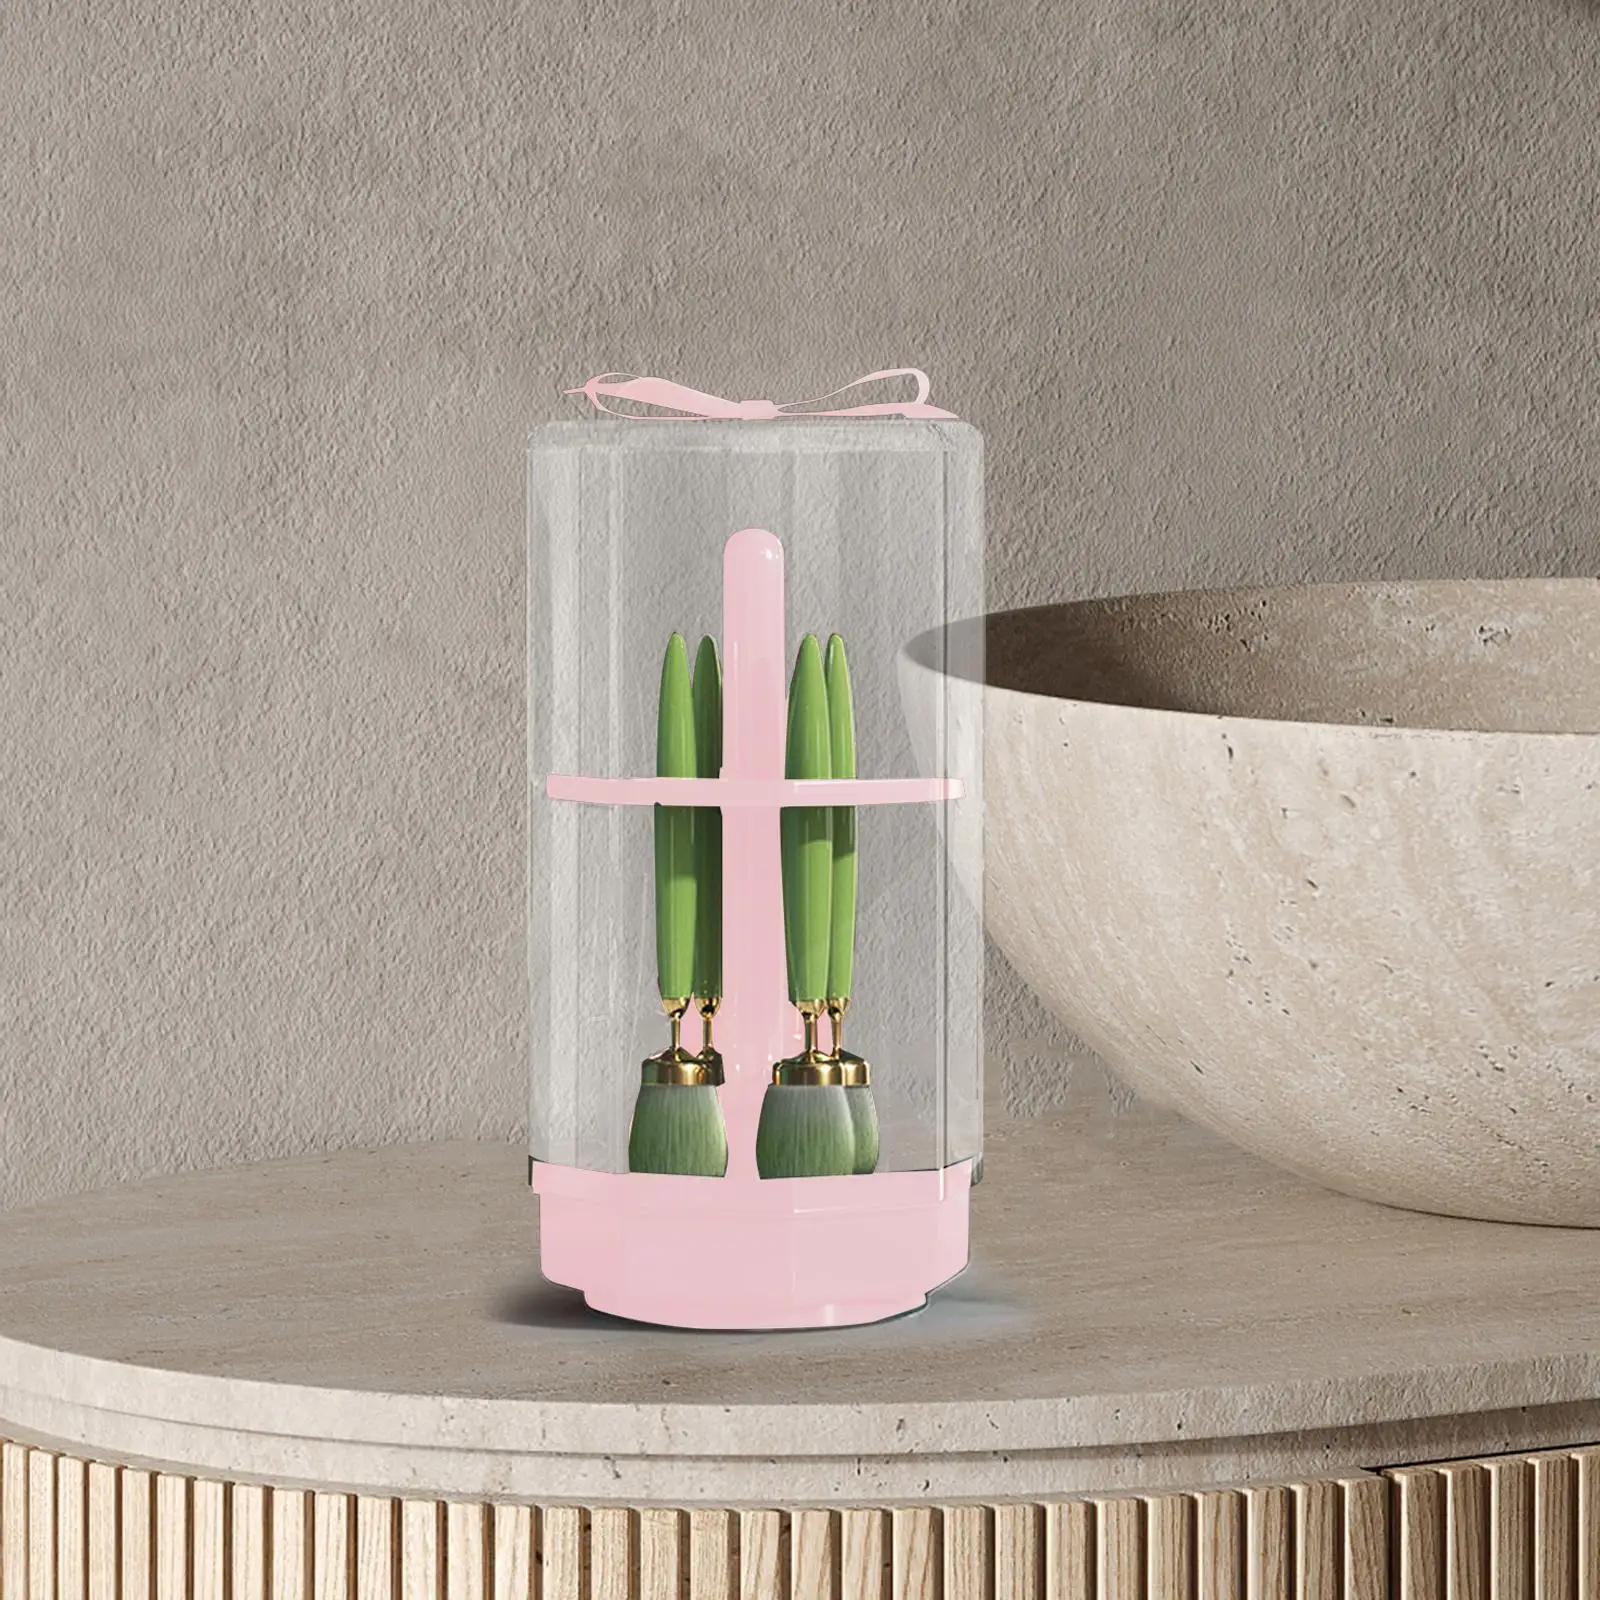 Dustproof Makeup Brush Drying Rack with Cover Anti Slip Professional Storage Container Brush Holder for Vanity Table Bathroom